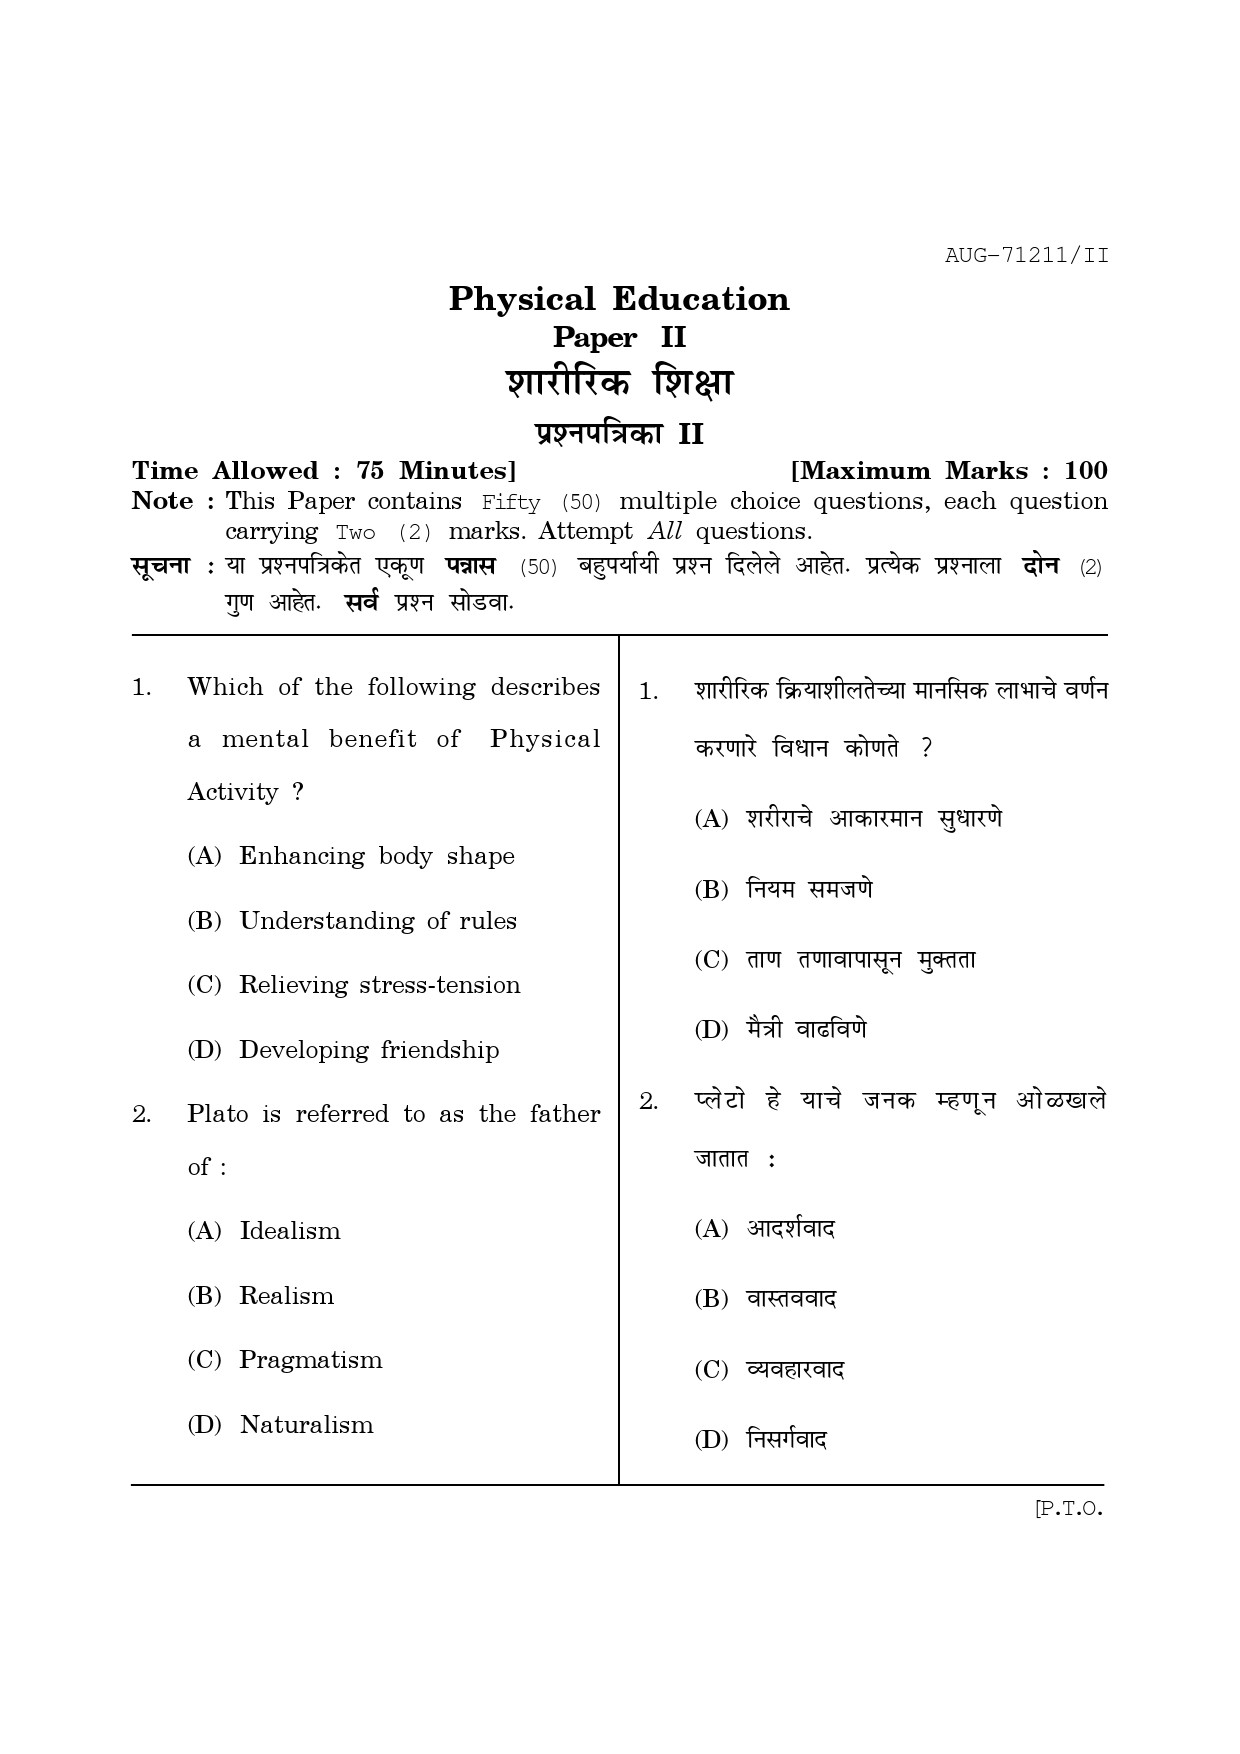 Maharashtra SET Physical Education Question Paper II August 2011 1